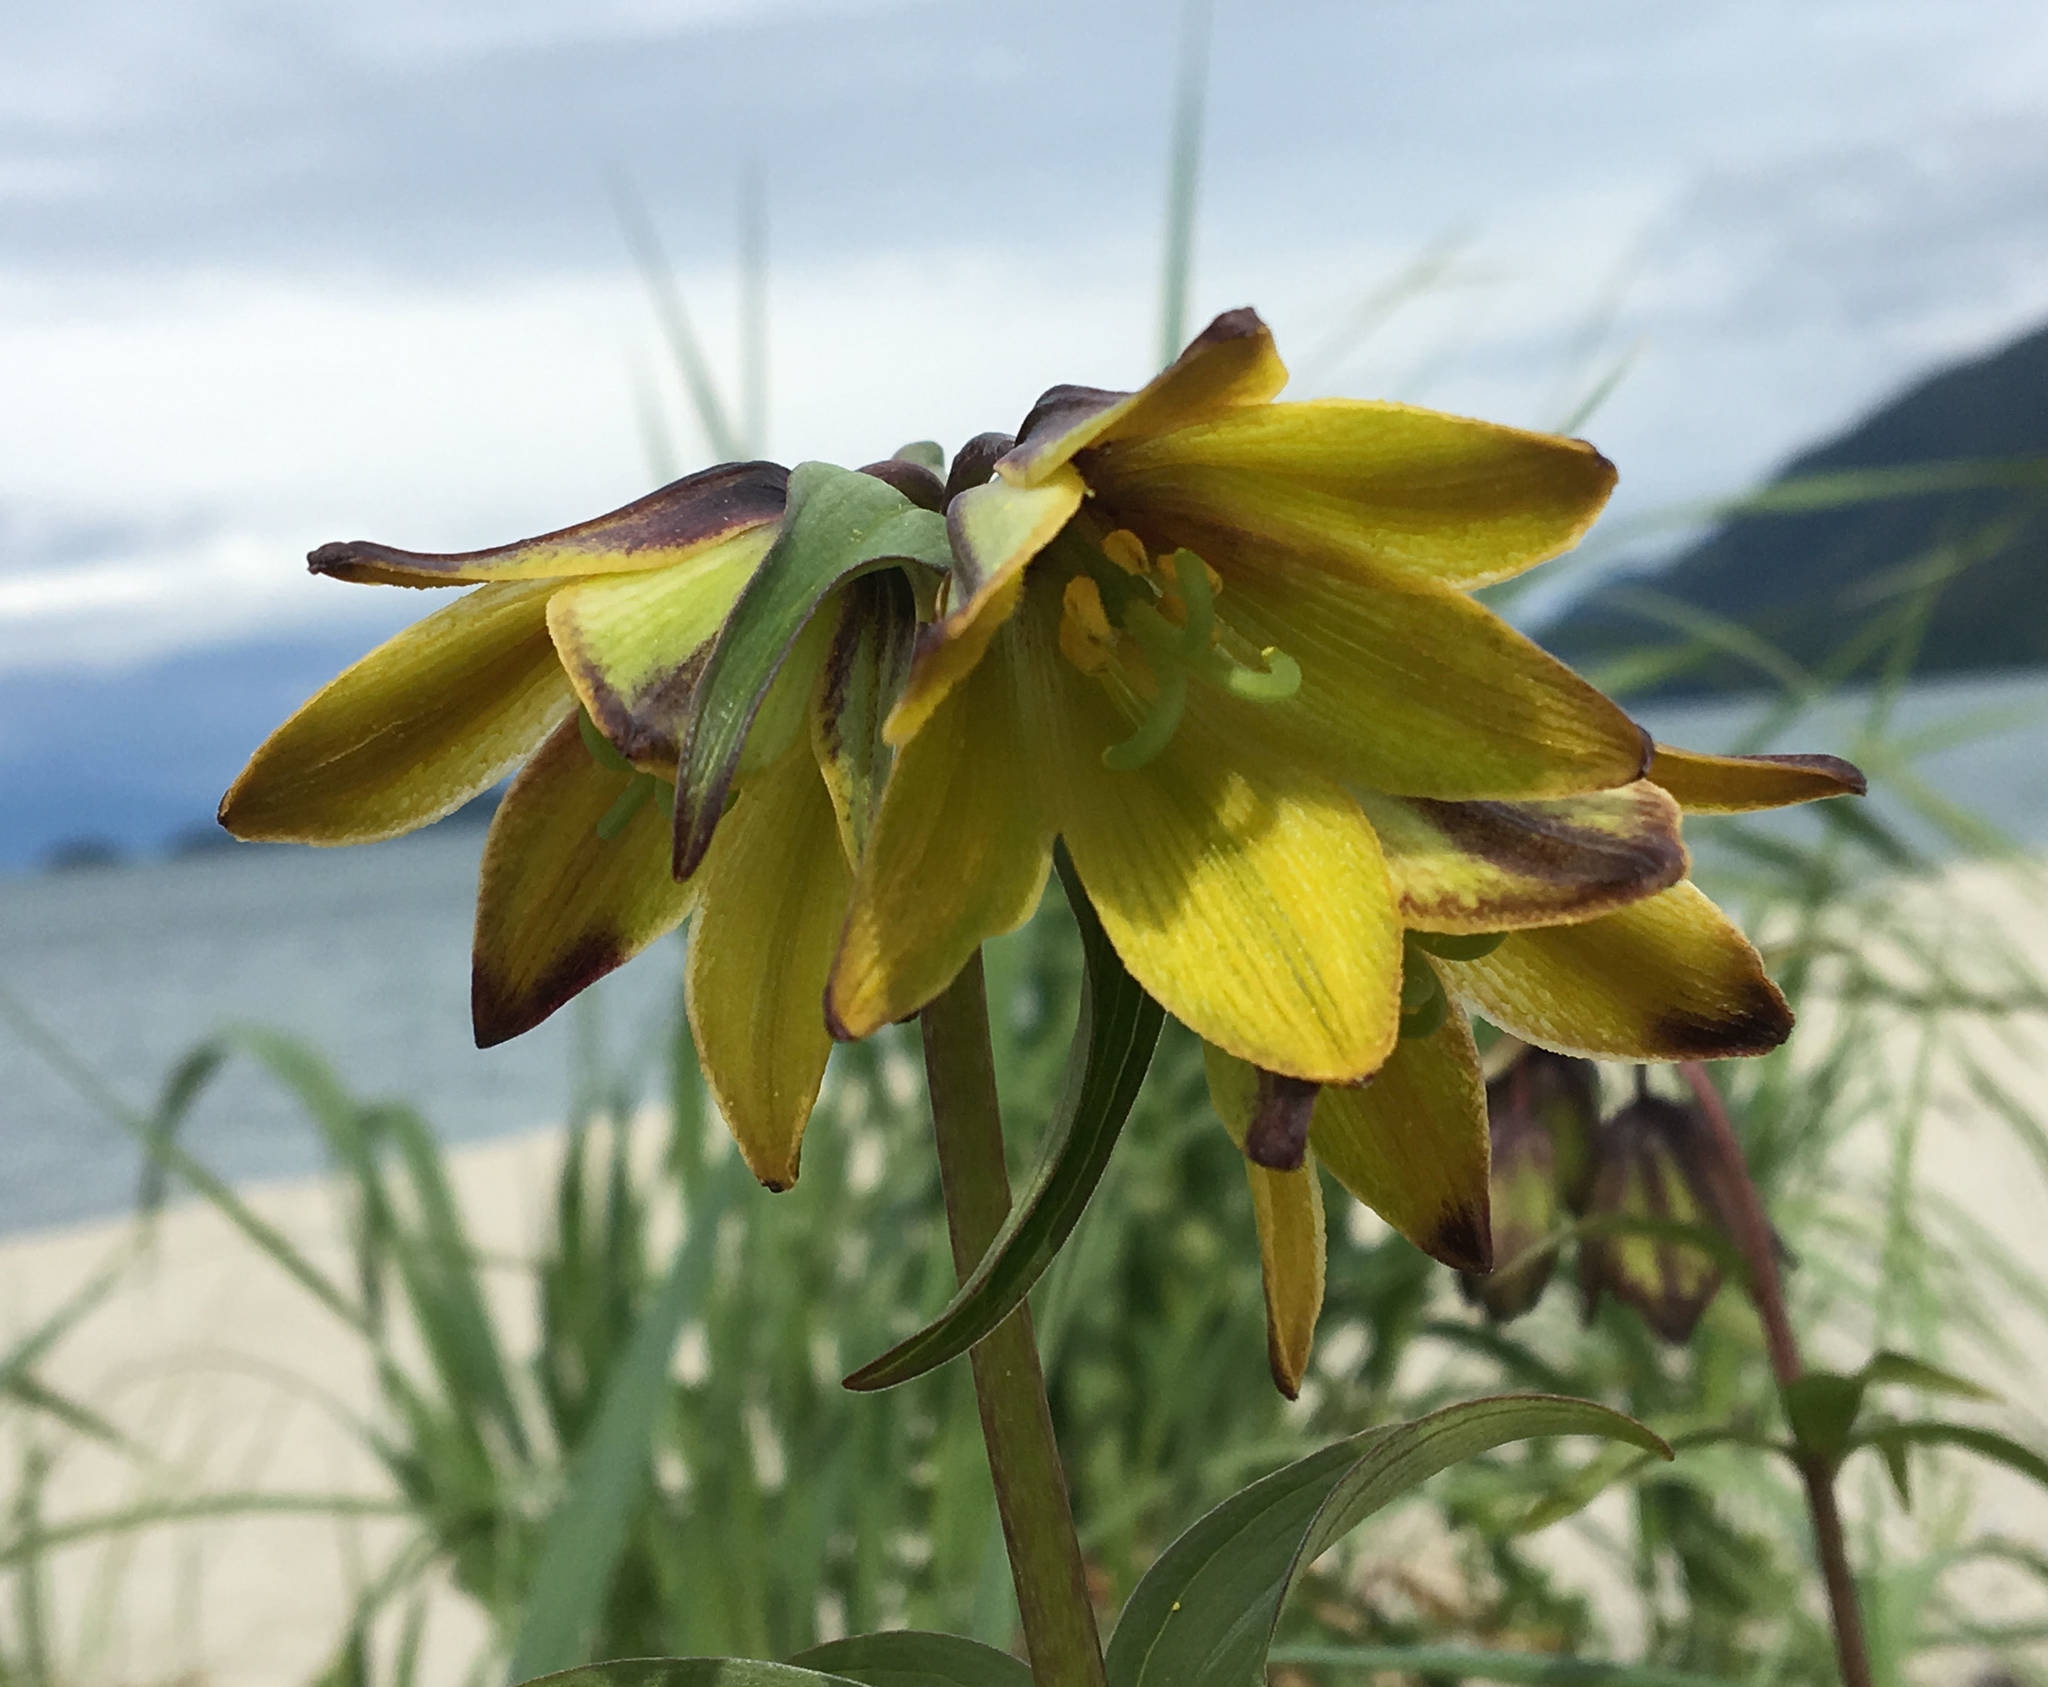 Almost all chocolate lily flowers are brown, but sometimes we find a rare yellow-flowered individual. (Denise Carroll | Courtesy Photo)